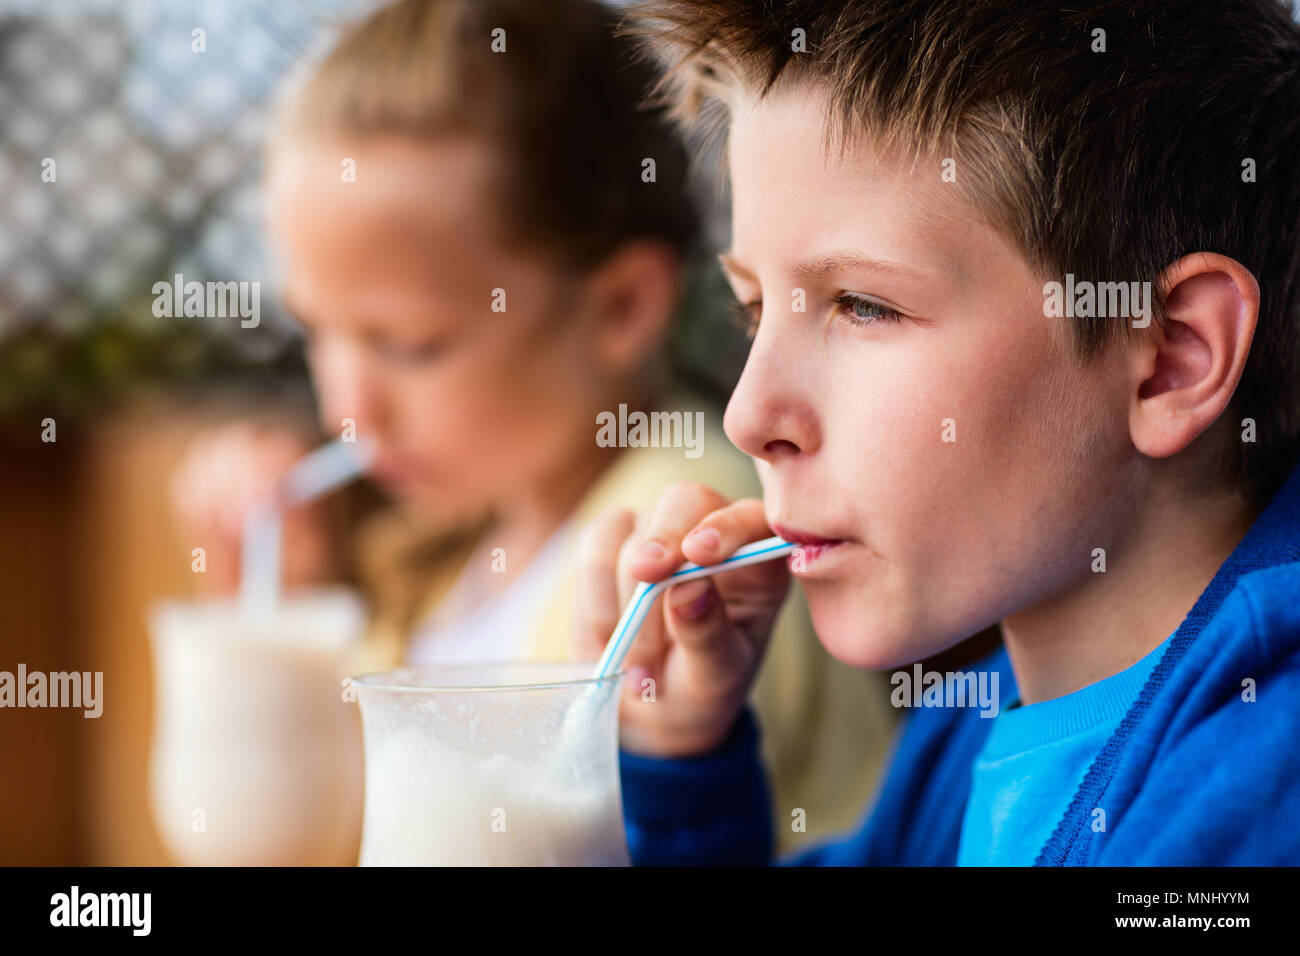 Kids brother and sister drinking milkshakes in outdoor cafe Stock Photo